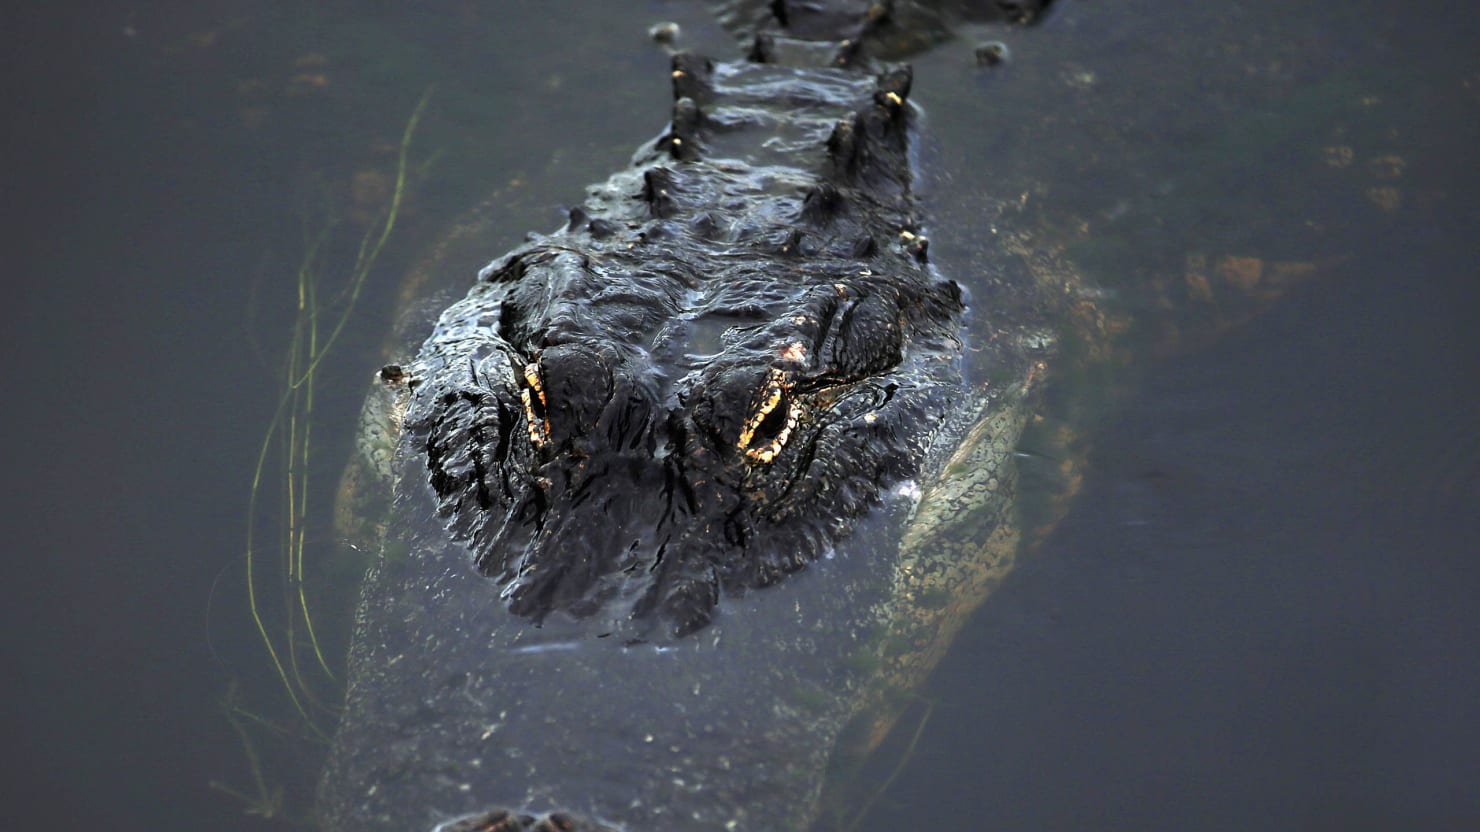 Two Giant Alligators Caught in Mississippi1480 x 832